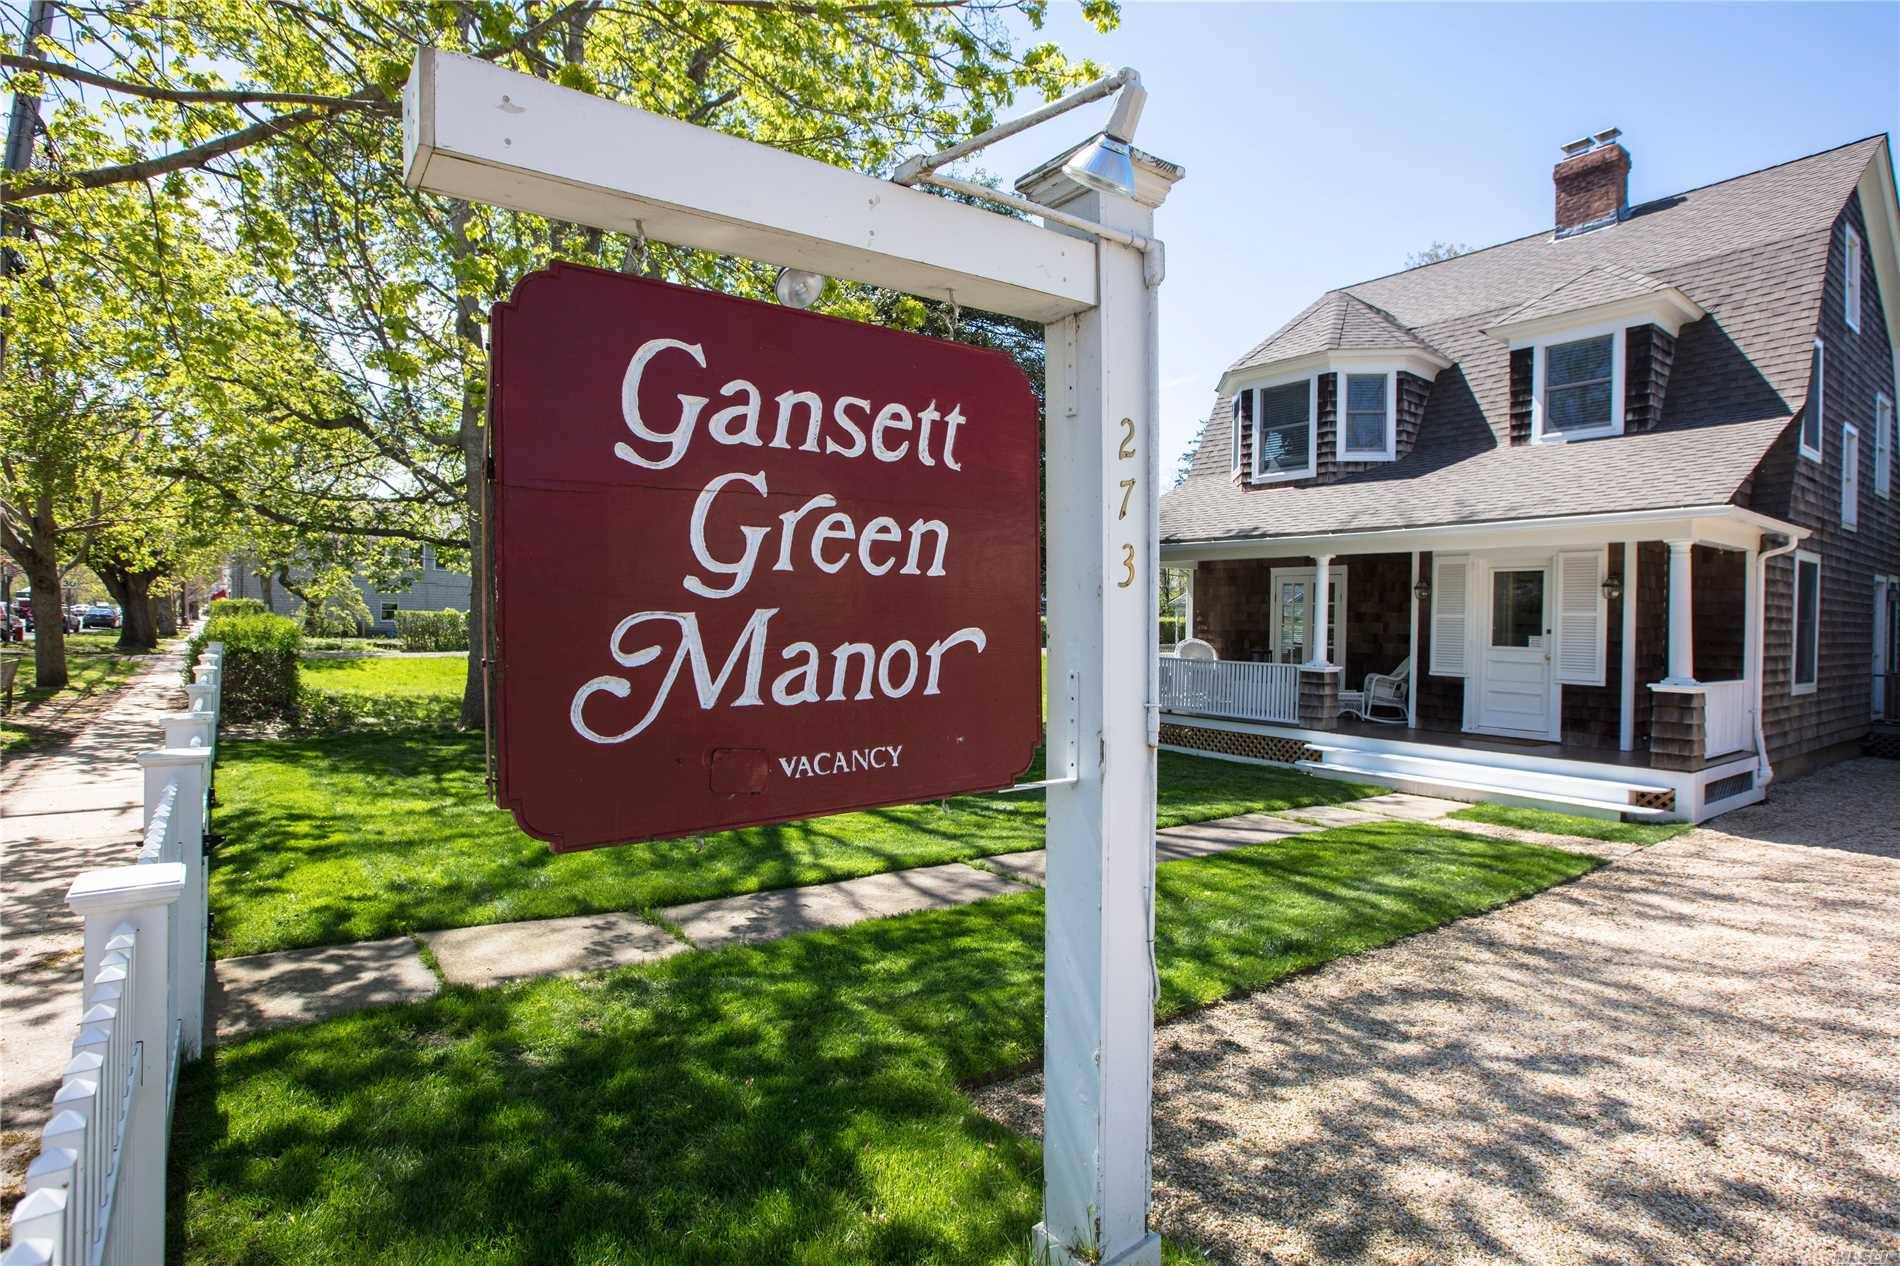 This Beautiful, Iconic Hamptons Inn Hotel Offers Updated Yet Unspoiled Country Elegance In Prestigious Amagansett.